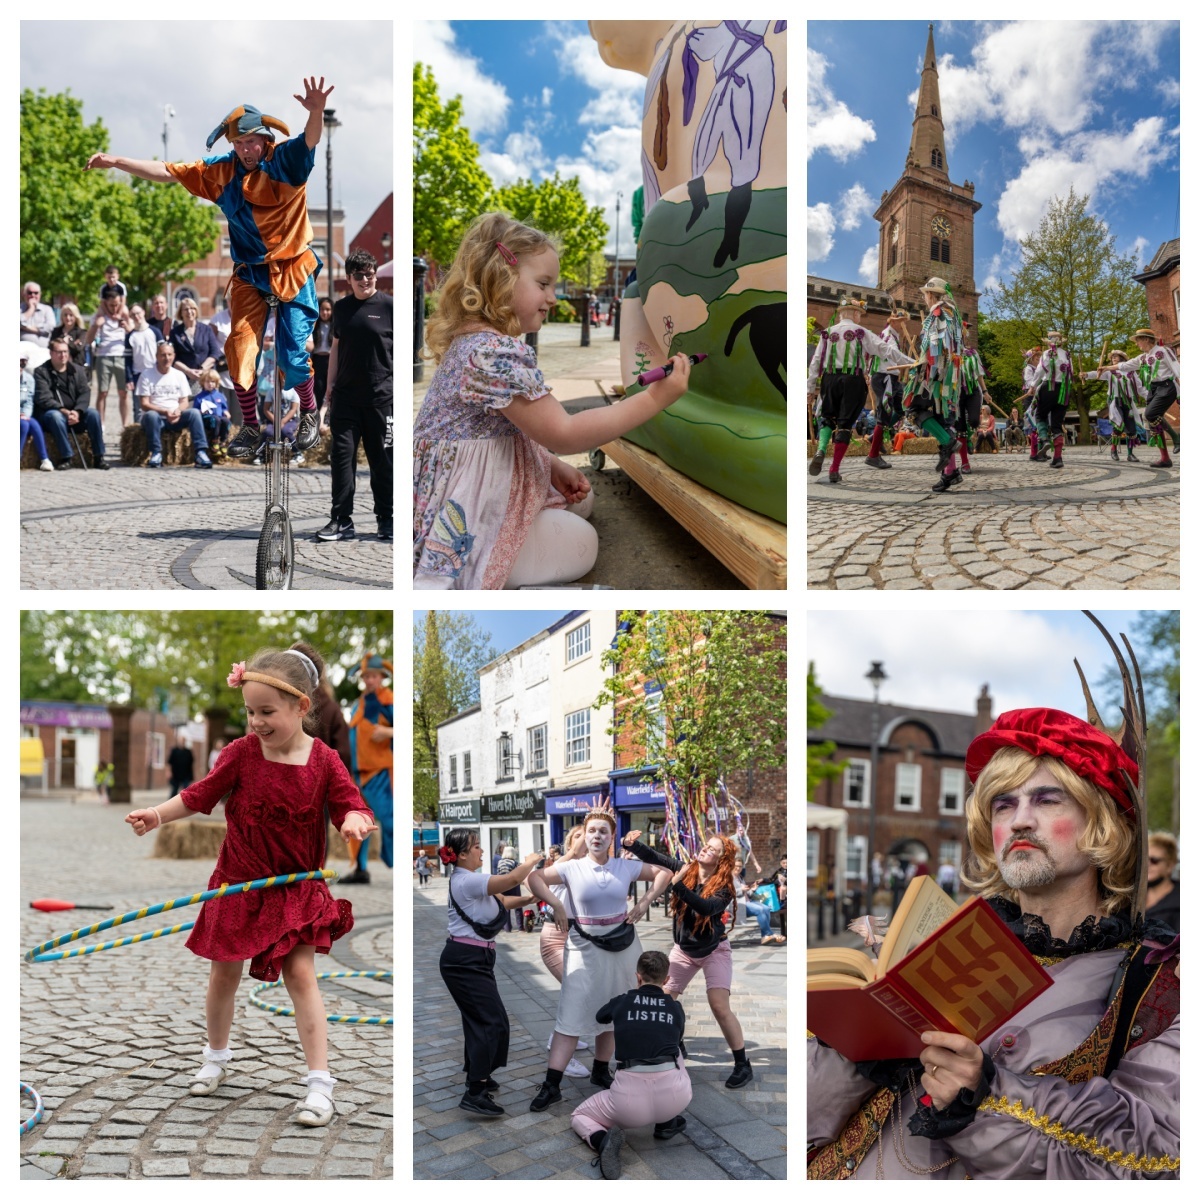 Today is the day!

 #Prescot #ElizabethanFayre 

Prescot town centre, 11am - 5pm. It's FREE to attend - there'll be crafts, music, dance, theatre, circus skills and so much more! 

Come along and join in the fun. The full programme is here orlo.uk/c3L4Z